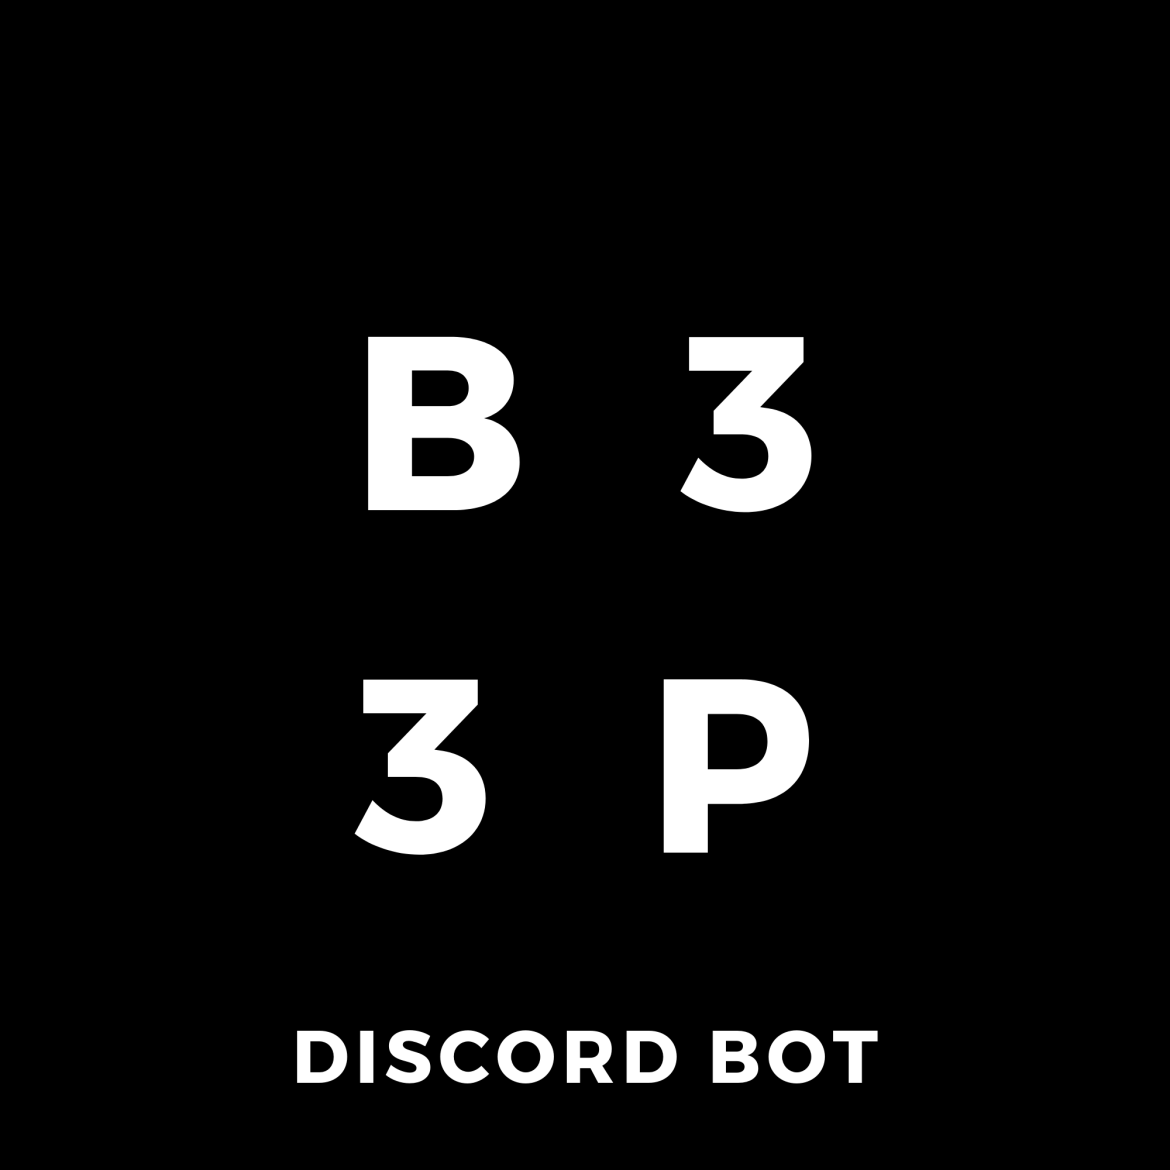 B33P Snippets